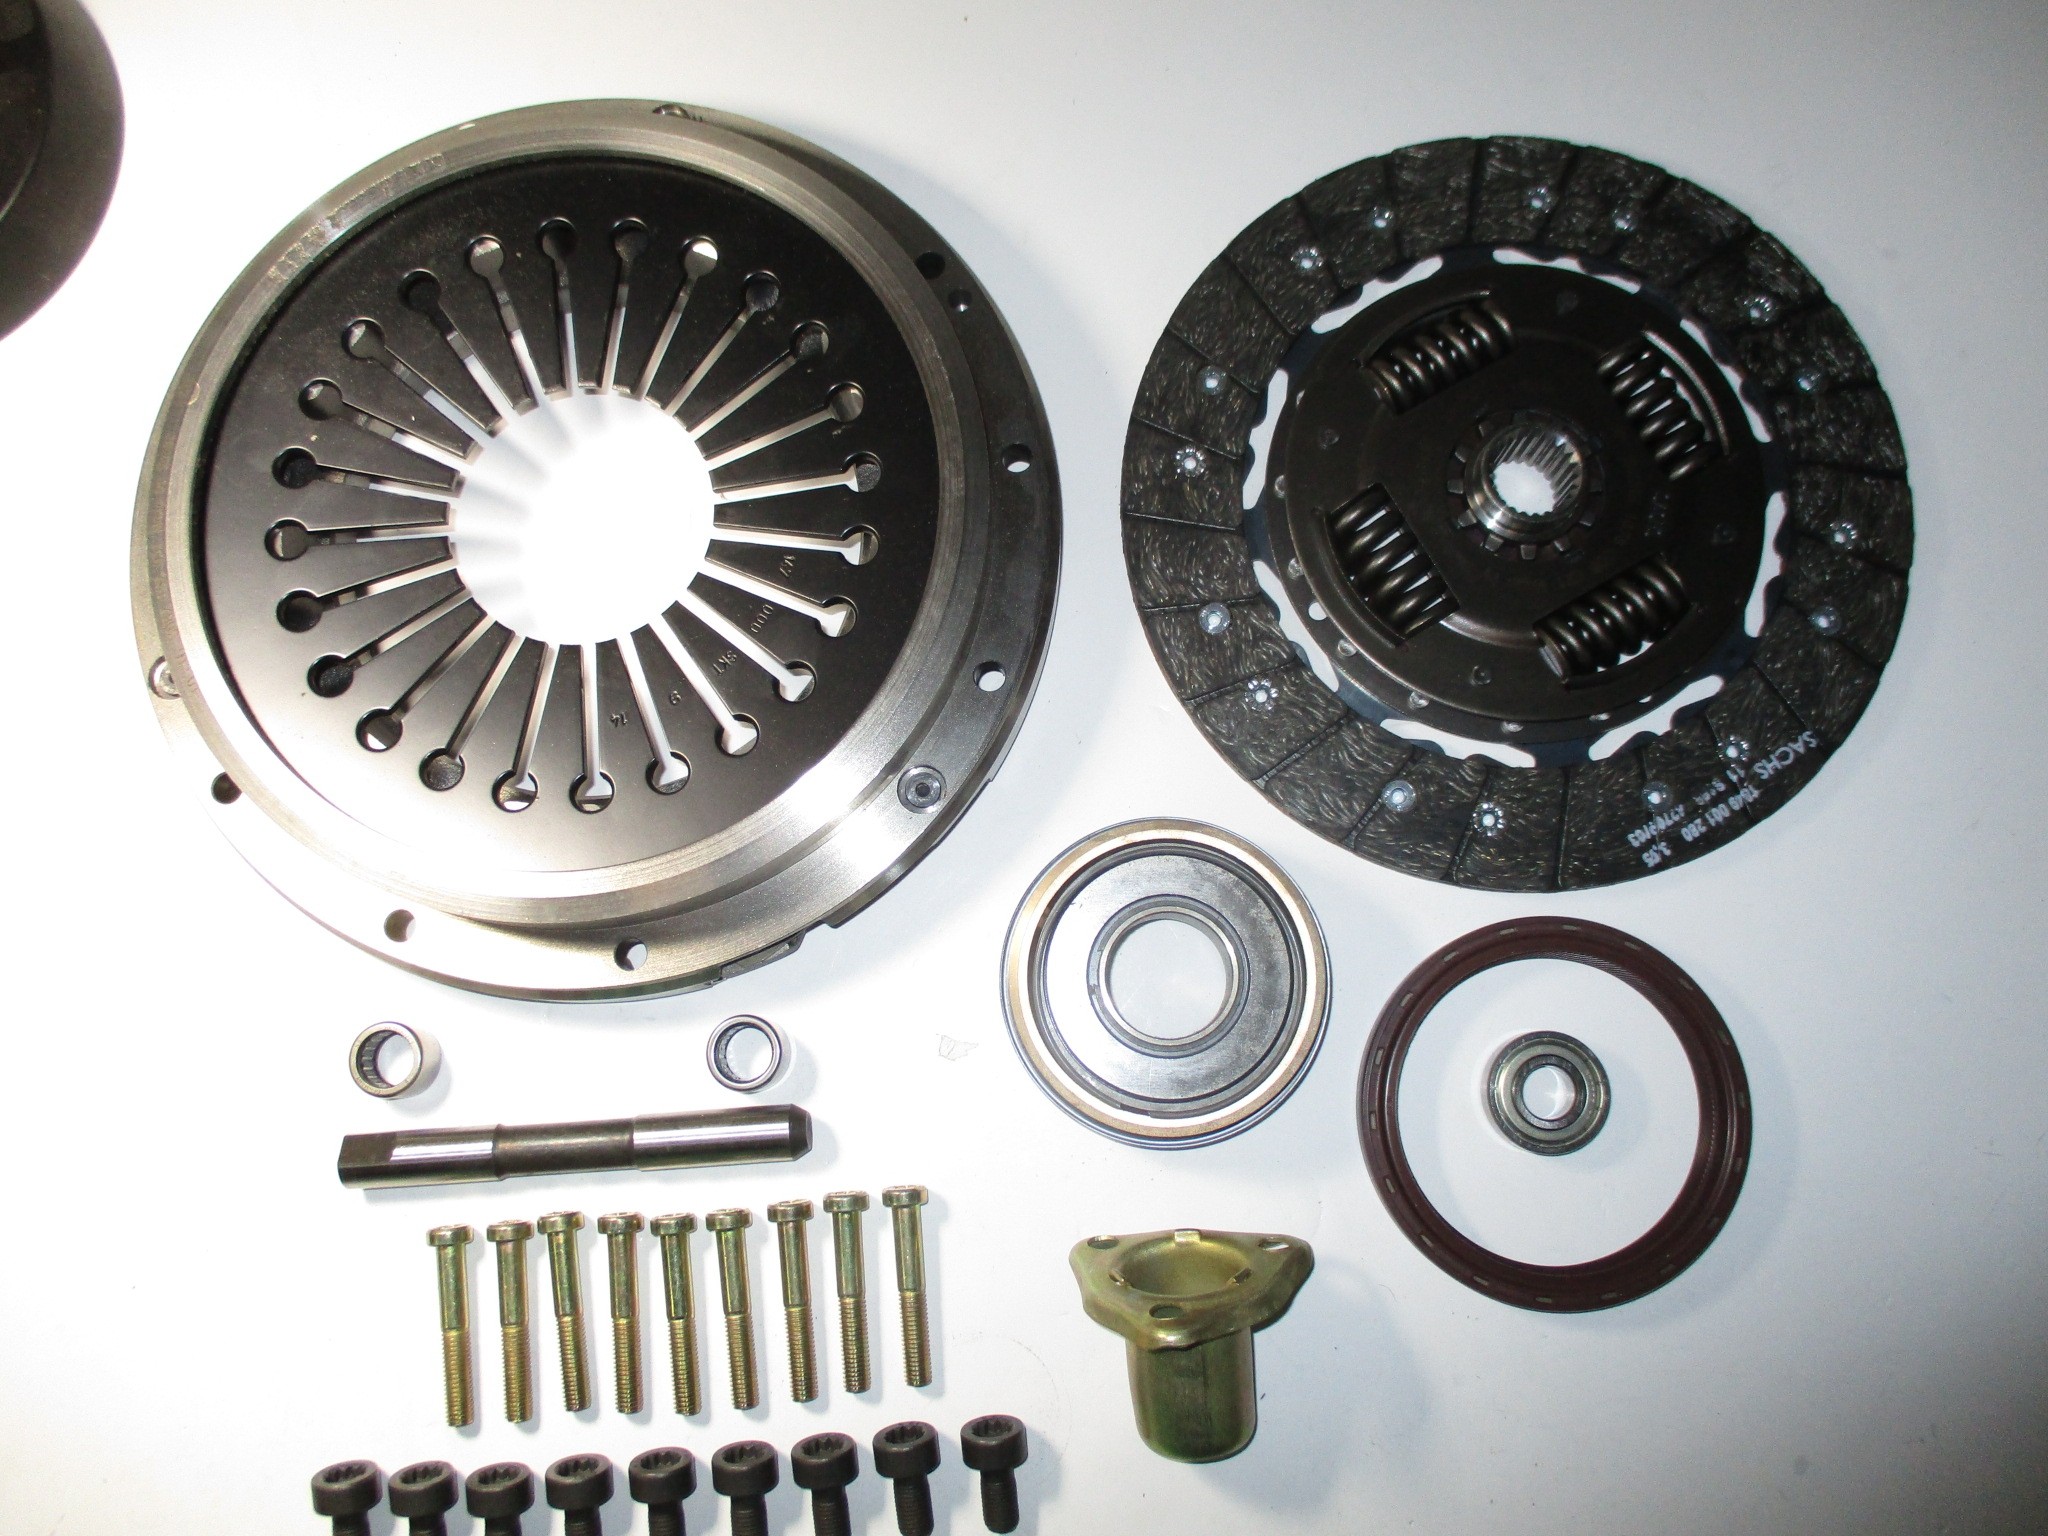 Clutch Kit 944 Turbo Complete deluxe kit 